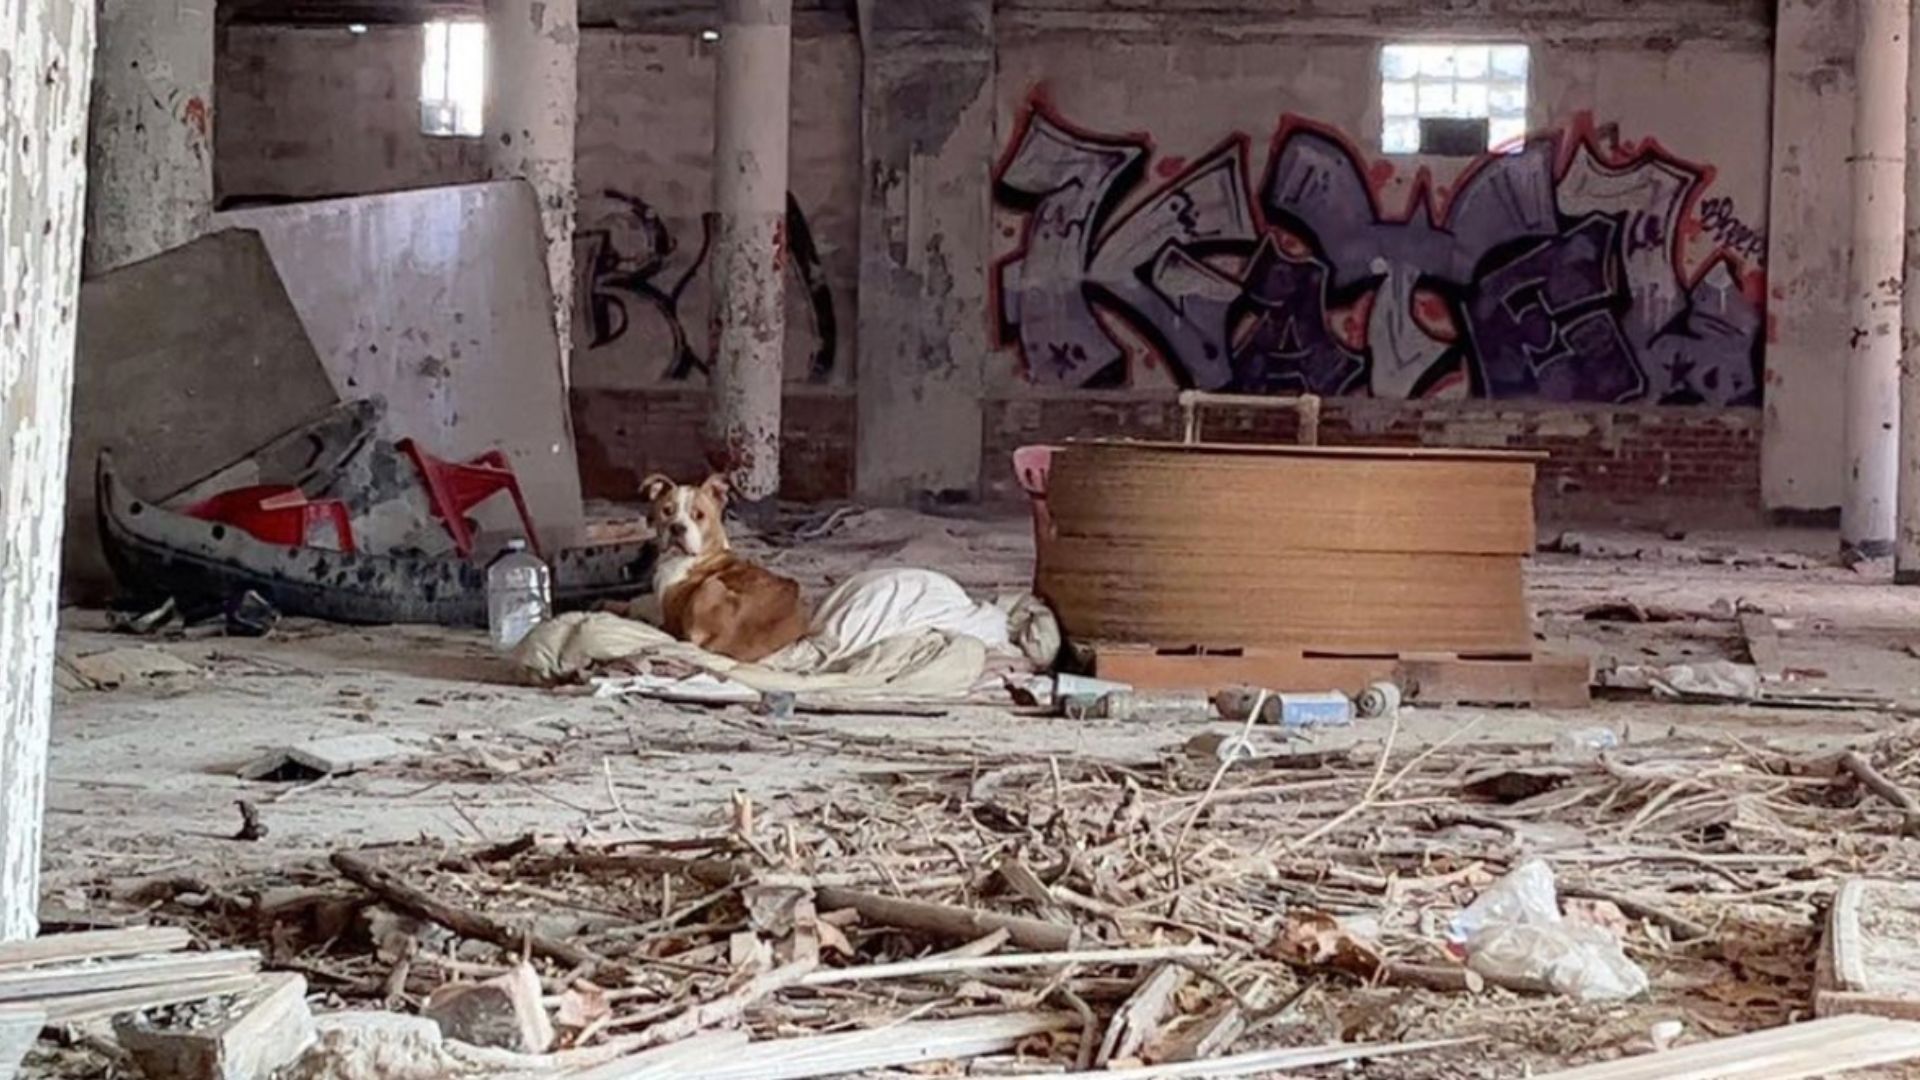 Rescuer In Tears After Finding A Starving Puppy Living In An Old Building All By Himself